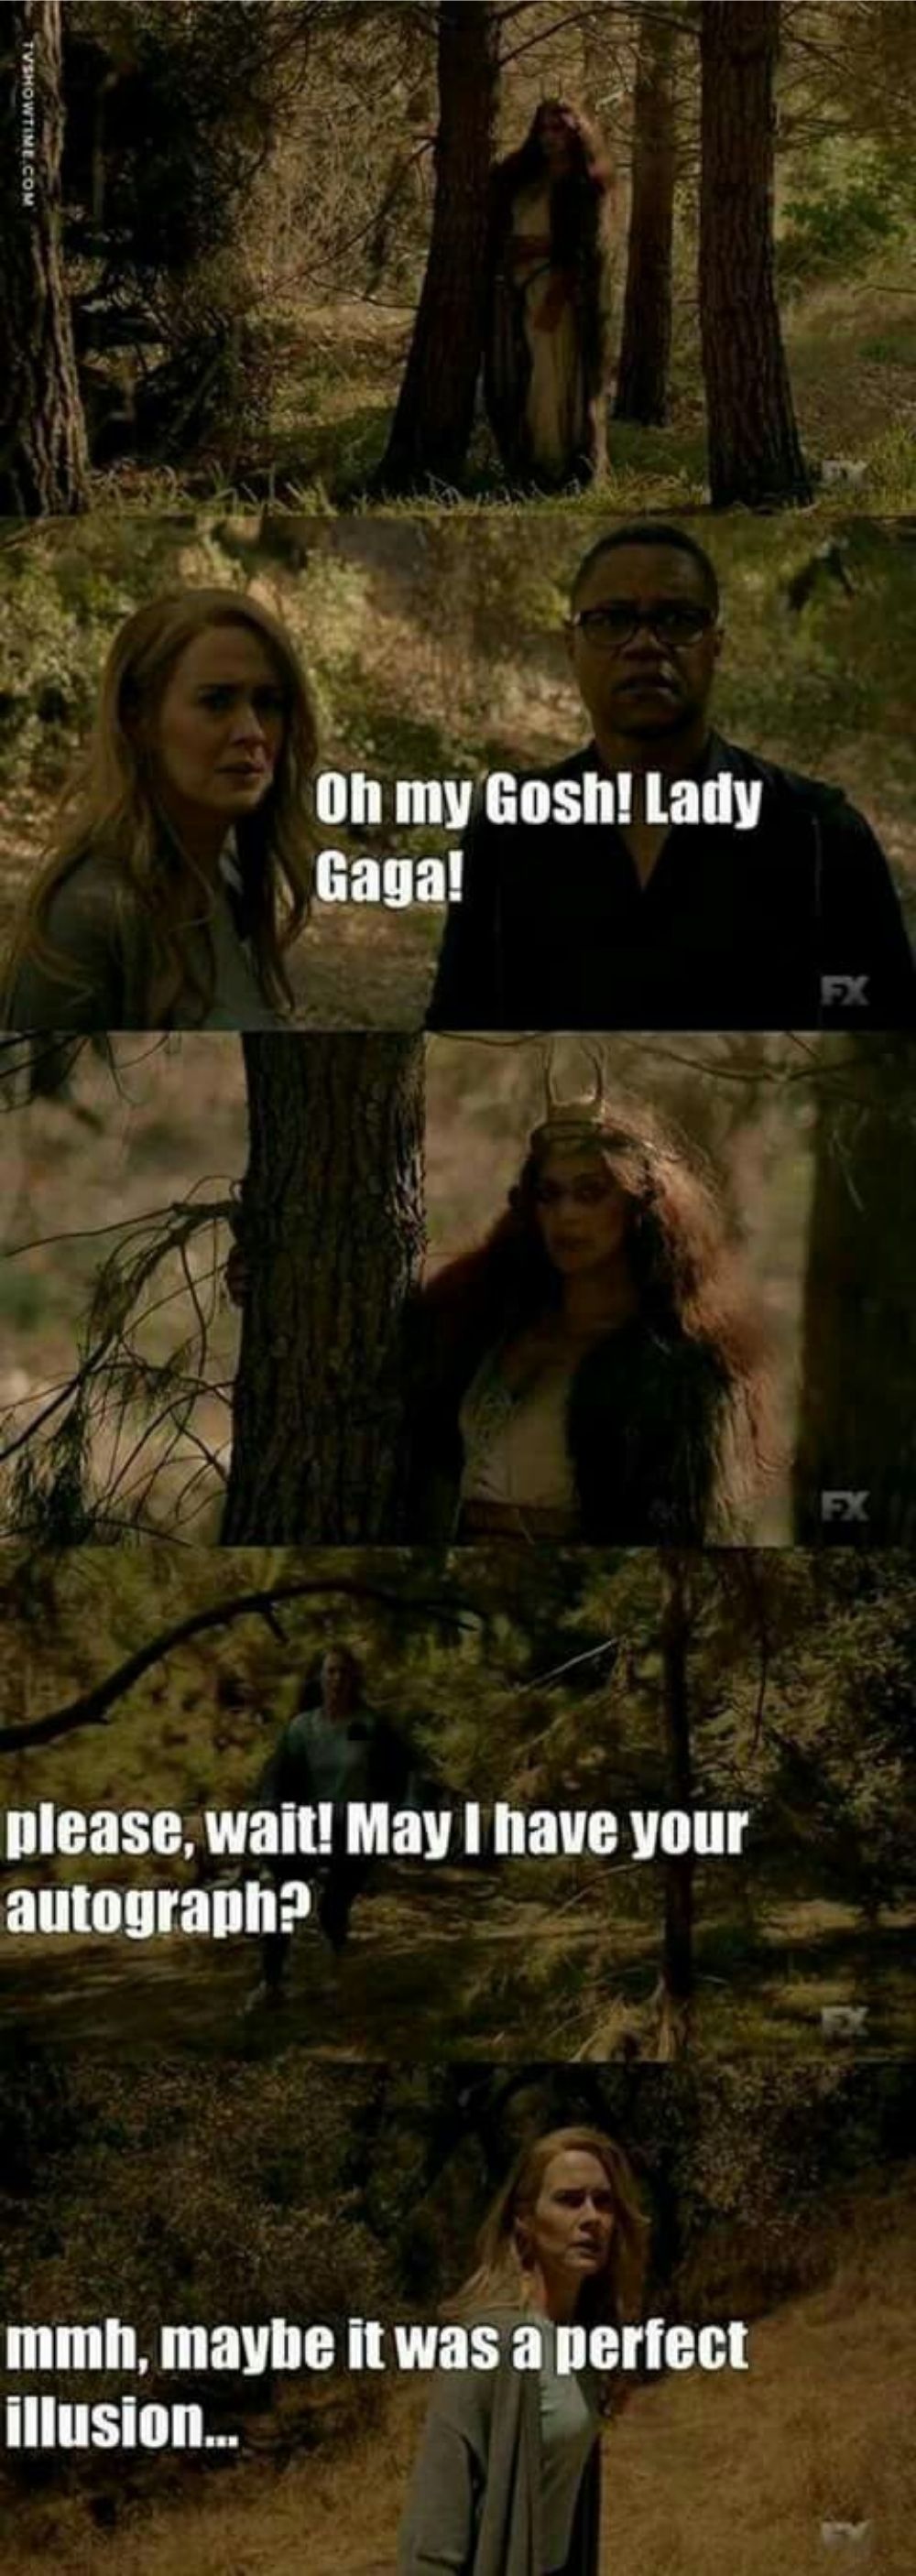 A meme involving characters from American Horror Story: Roanoke